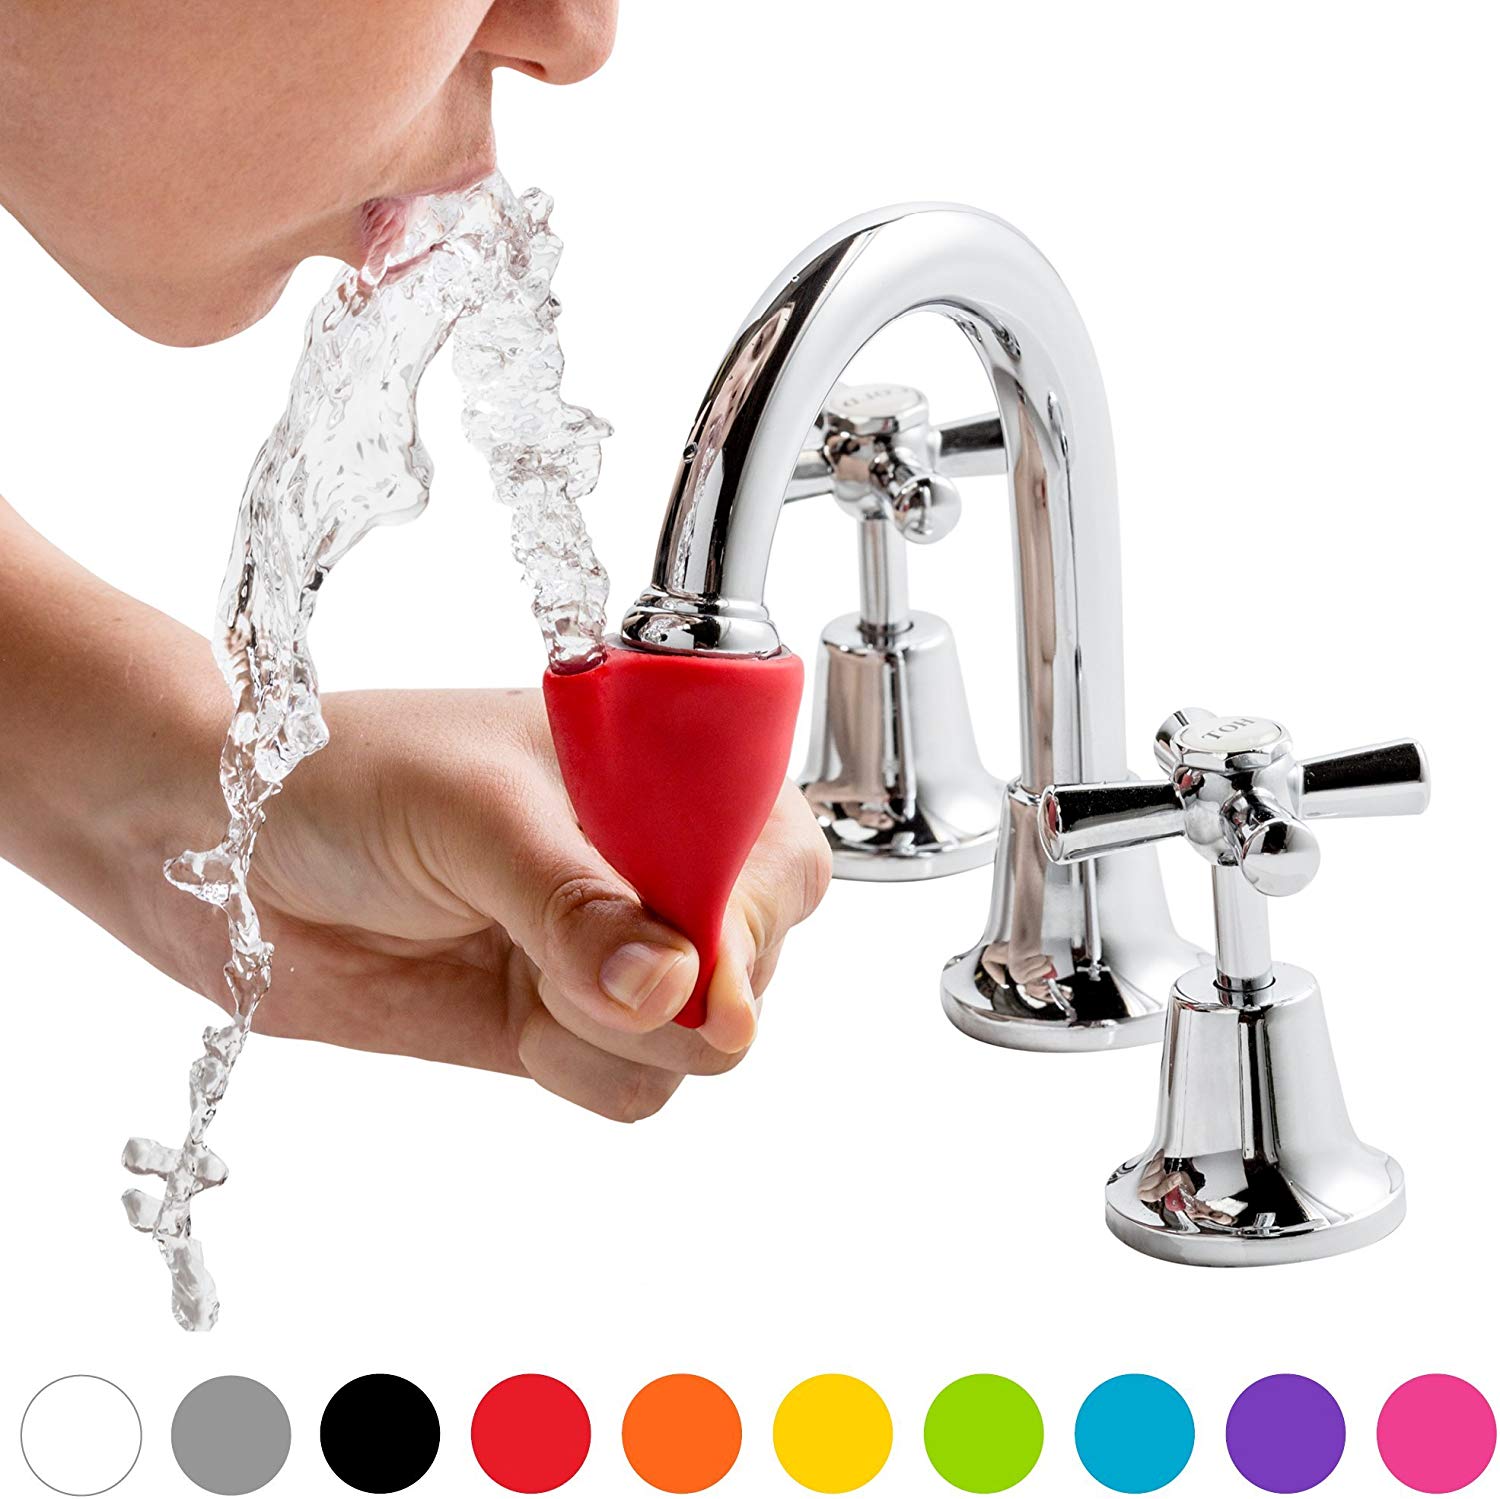 Dreamfarm Tapi Faucet Drinking Fountain Fits Most Taps Ask Invent